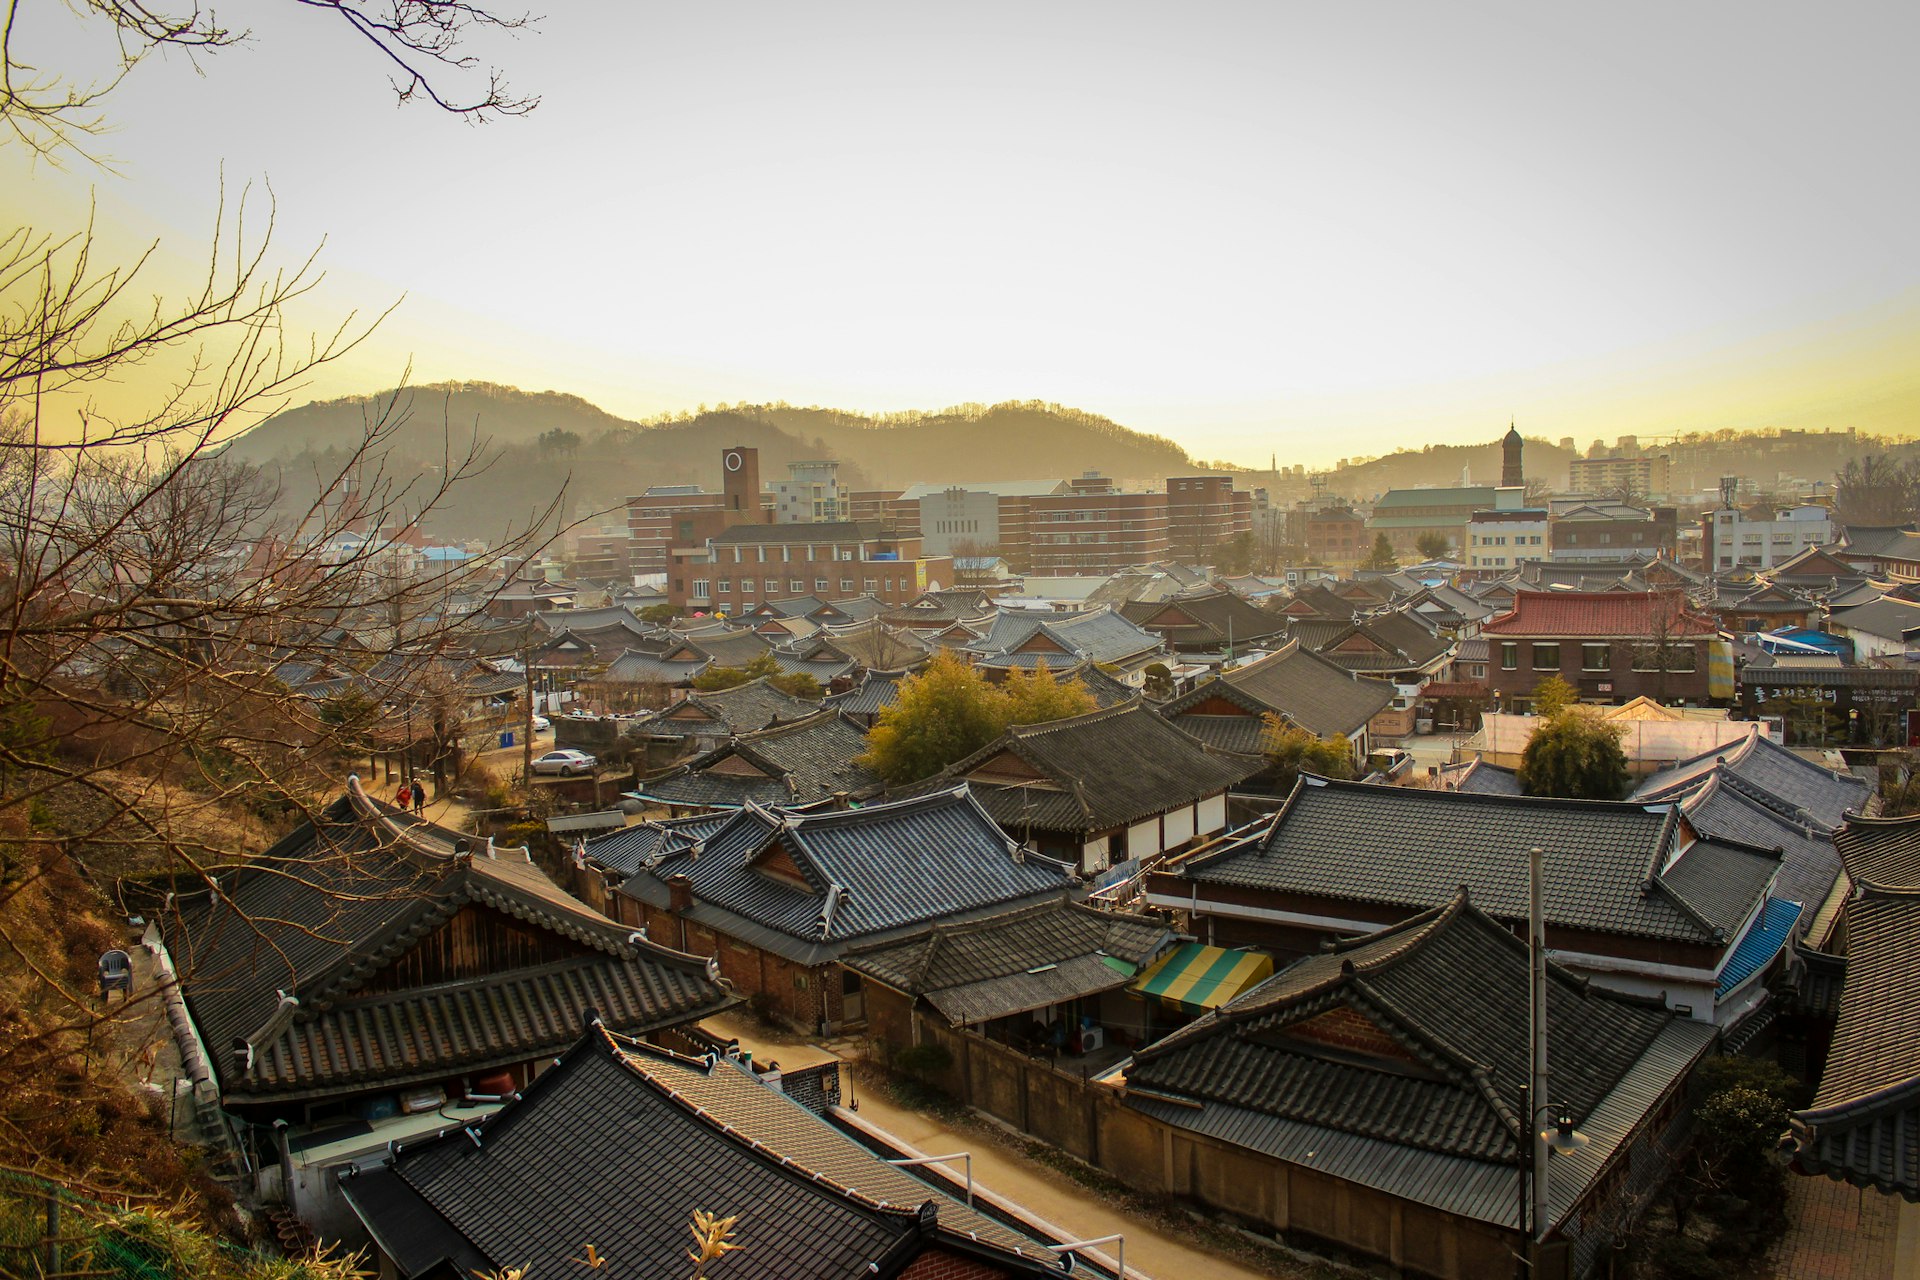 Rooftops of Jeonju's hanok village. Image by Chris Anderson / CC BY-SA 2.0